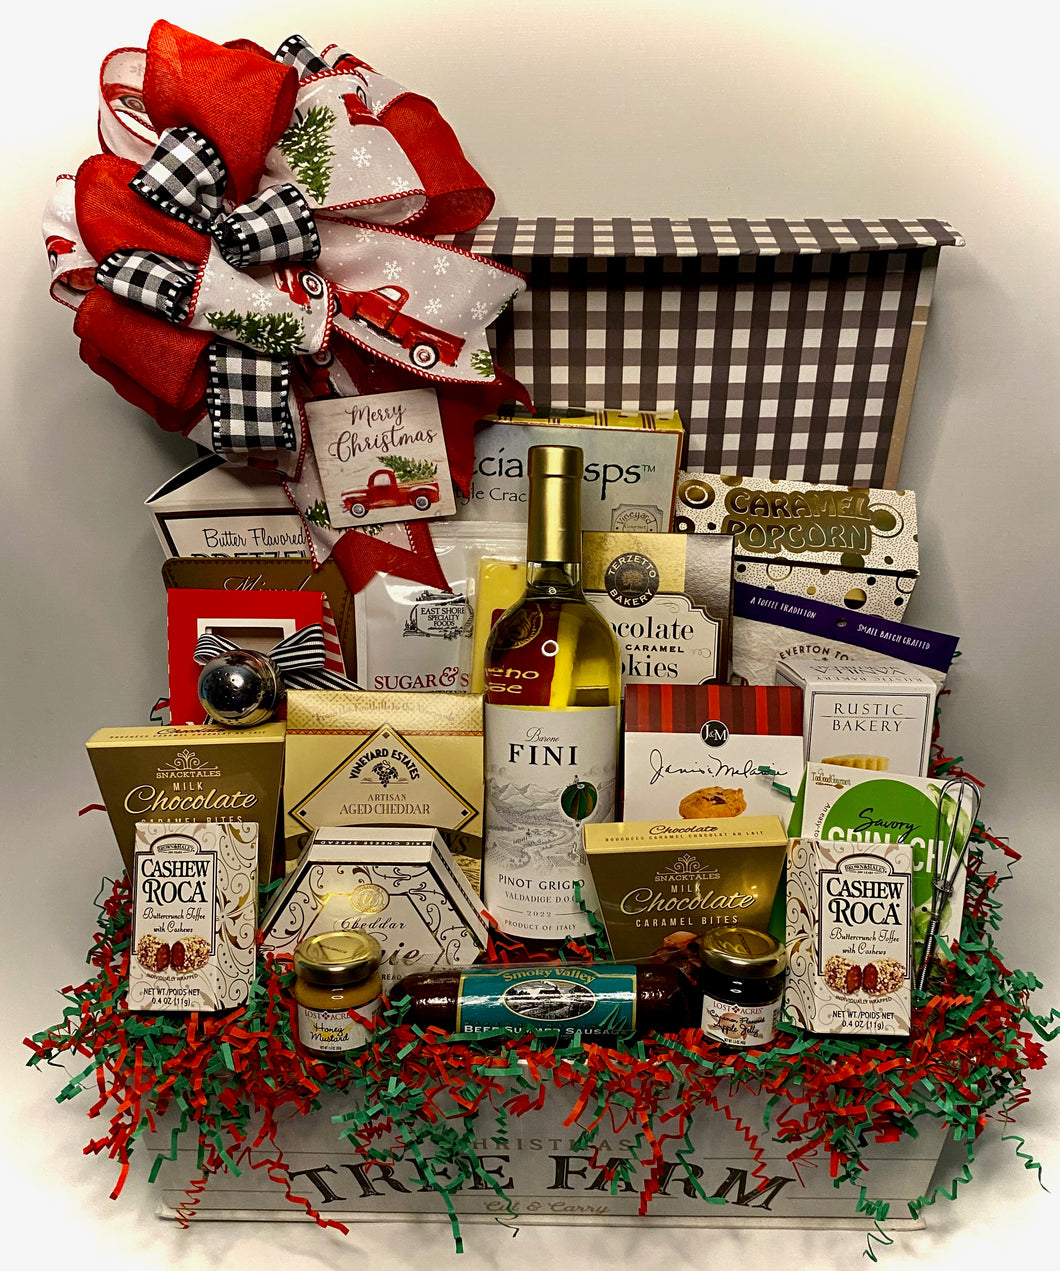 Elevate Your Gifting Experience with Our Signature Christmas Gourmet Gift Basket! ✨🎁  This holiday season, elevate your gifting game with our stunning reusable flip-top box, thoughtfully curated to delight both the discerning gourmand and the festive aficionado! Overflowing with an enticing medley of sweet and savory treats, our exclusive collection is the epitome of culinary craftsmanship, meticulously designed to bring joy to families, offices, and gracious hosts or hostesses.